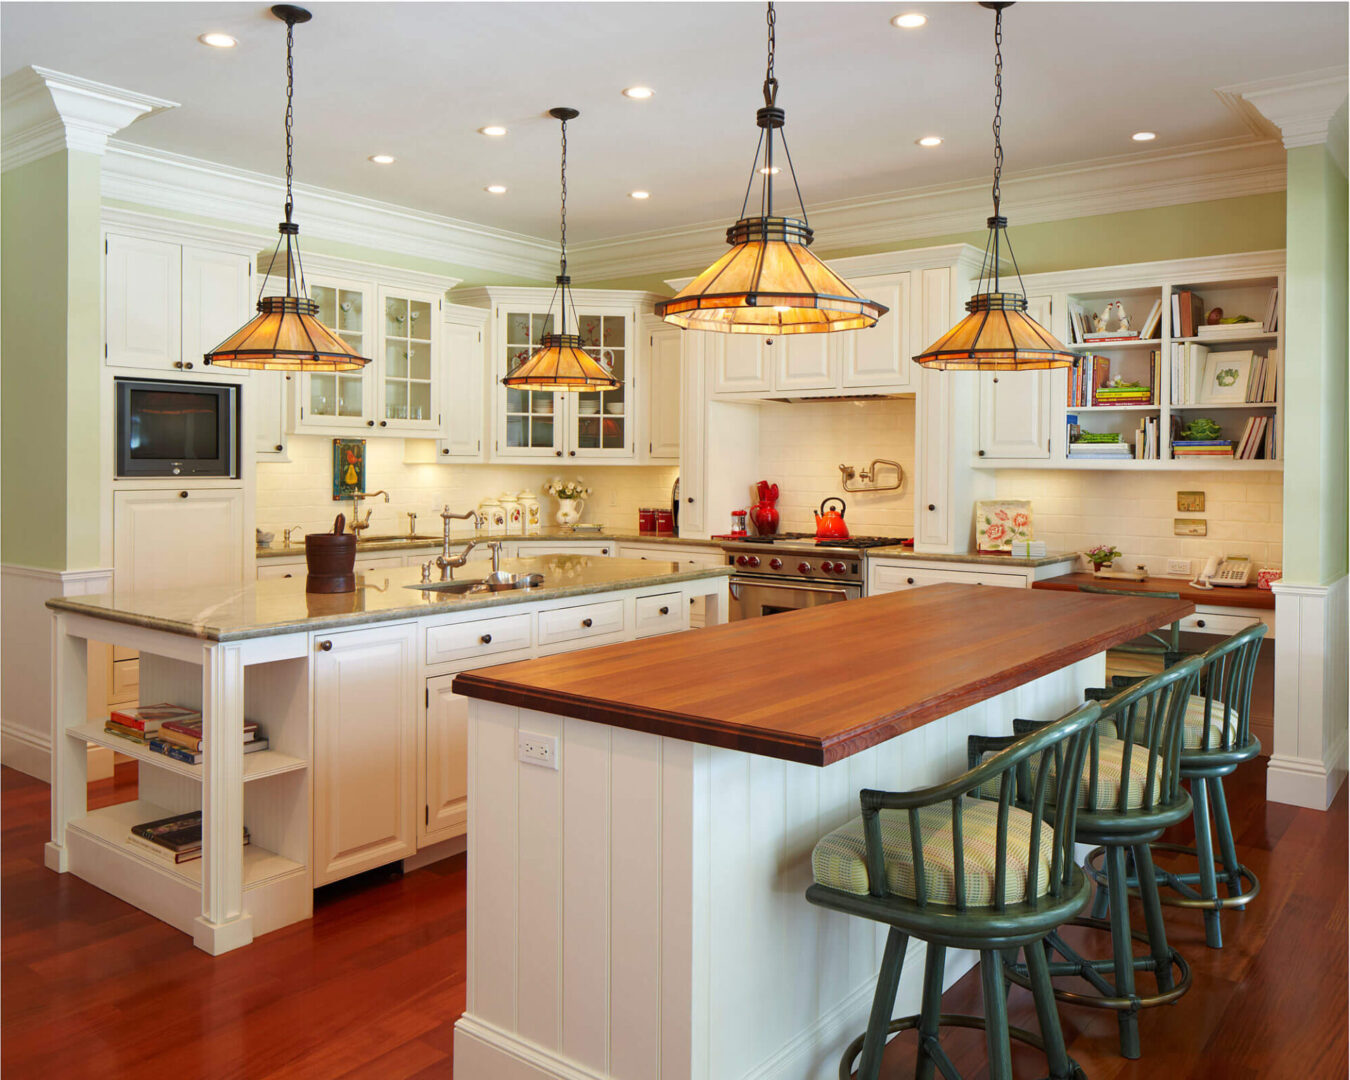 A kitchen with two large wooden stools and a counter.